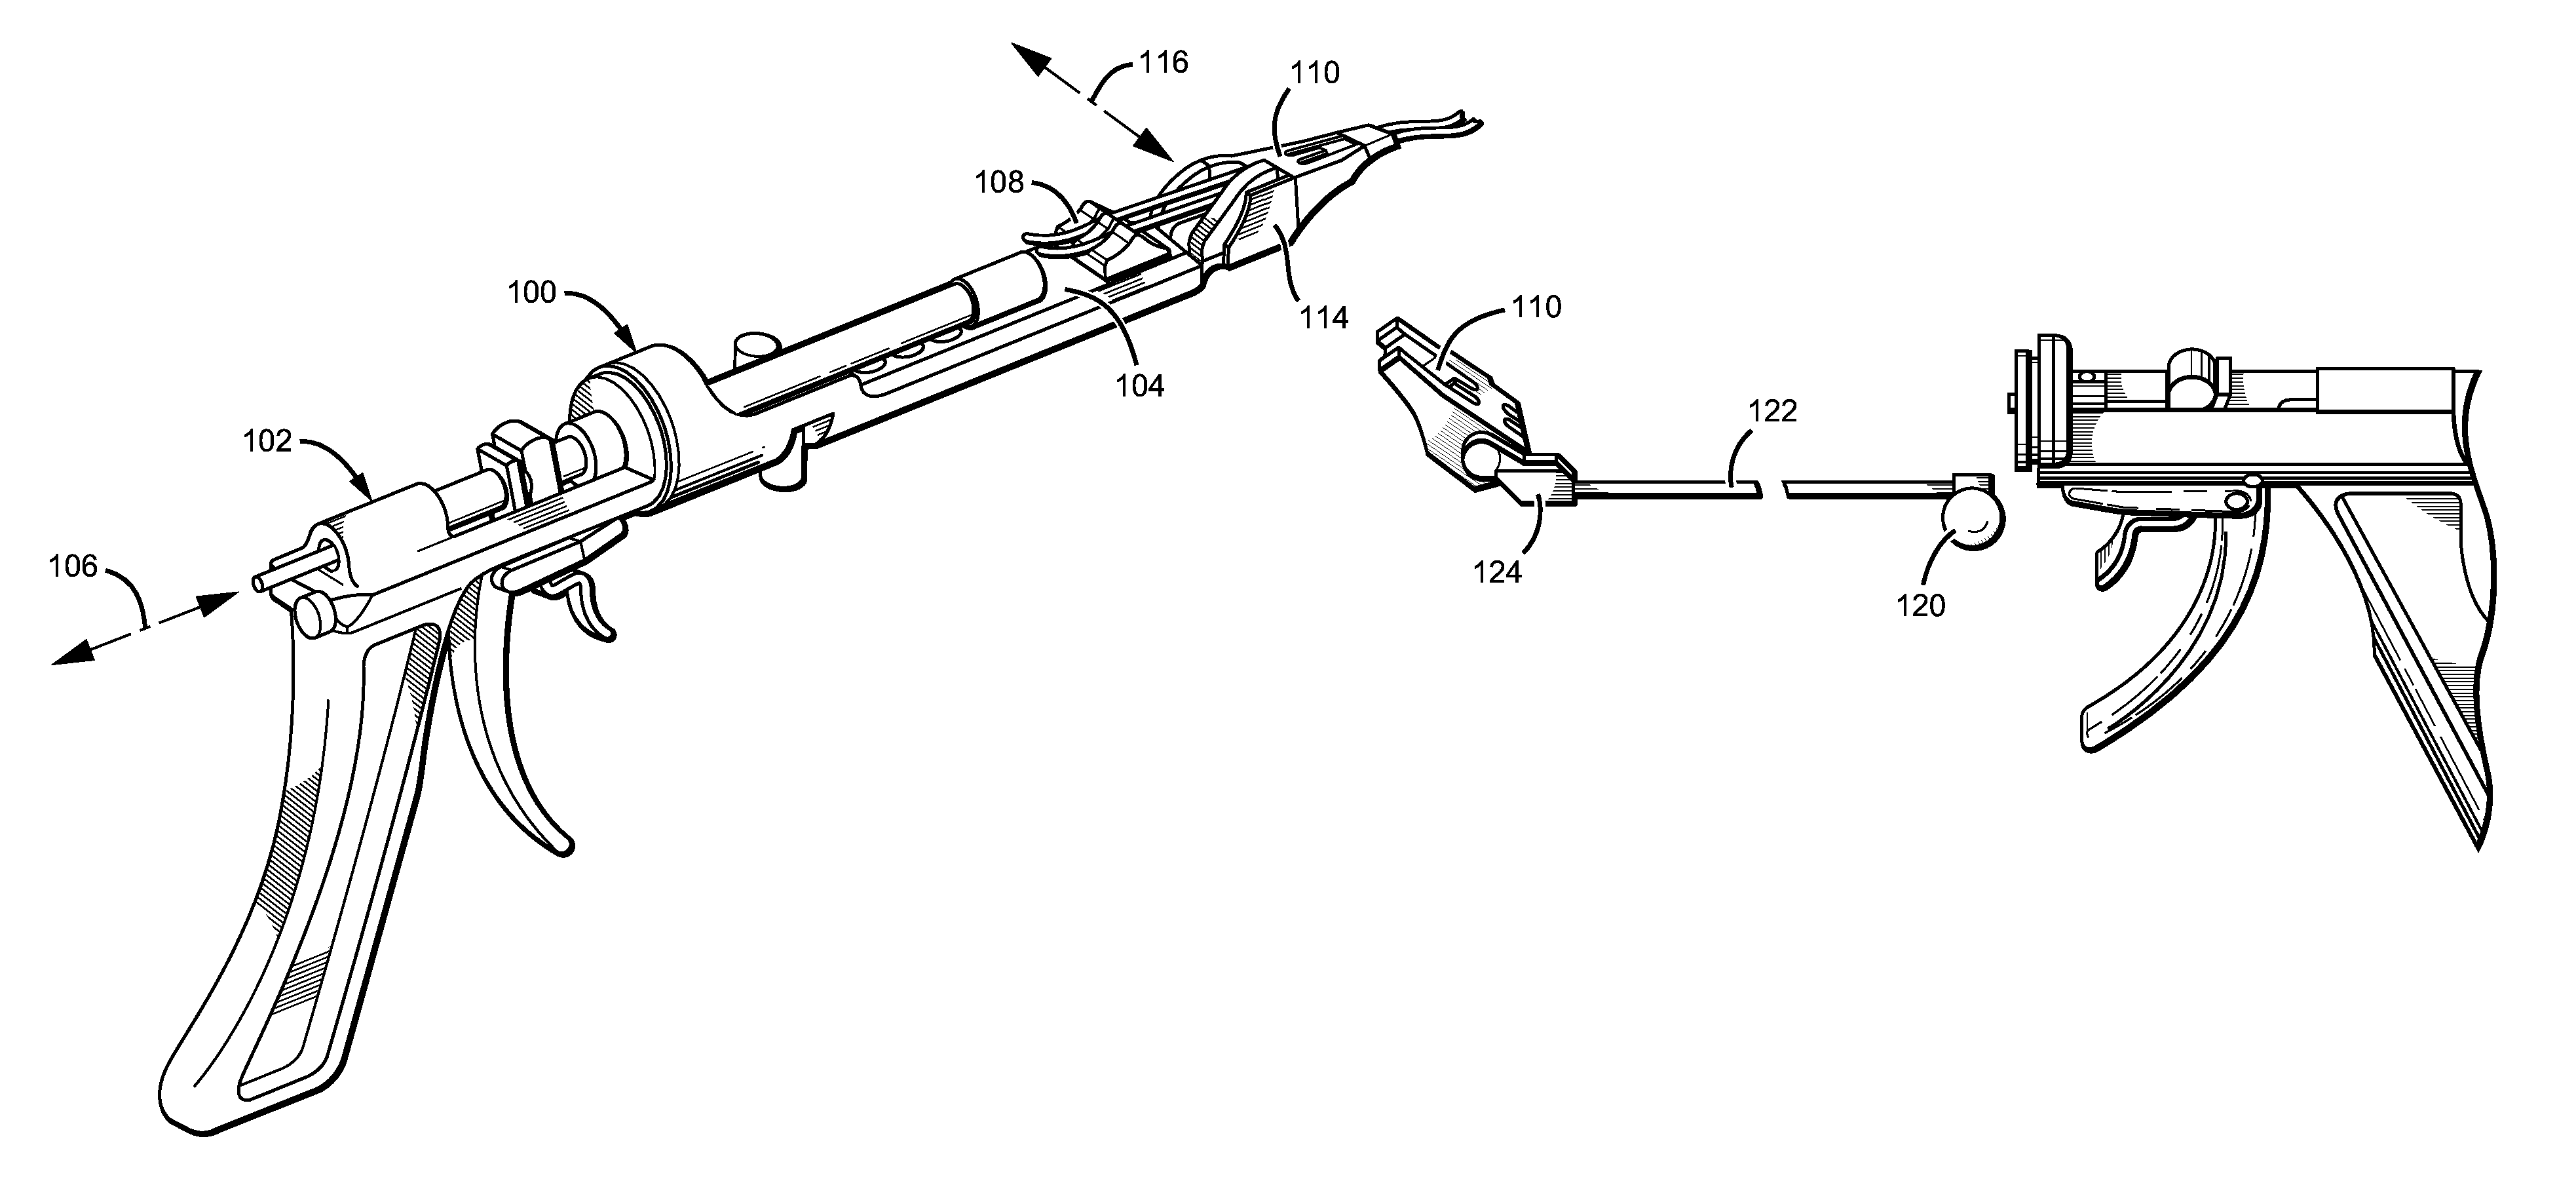 Surgical cable tensioning system